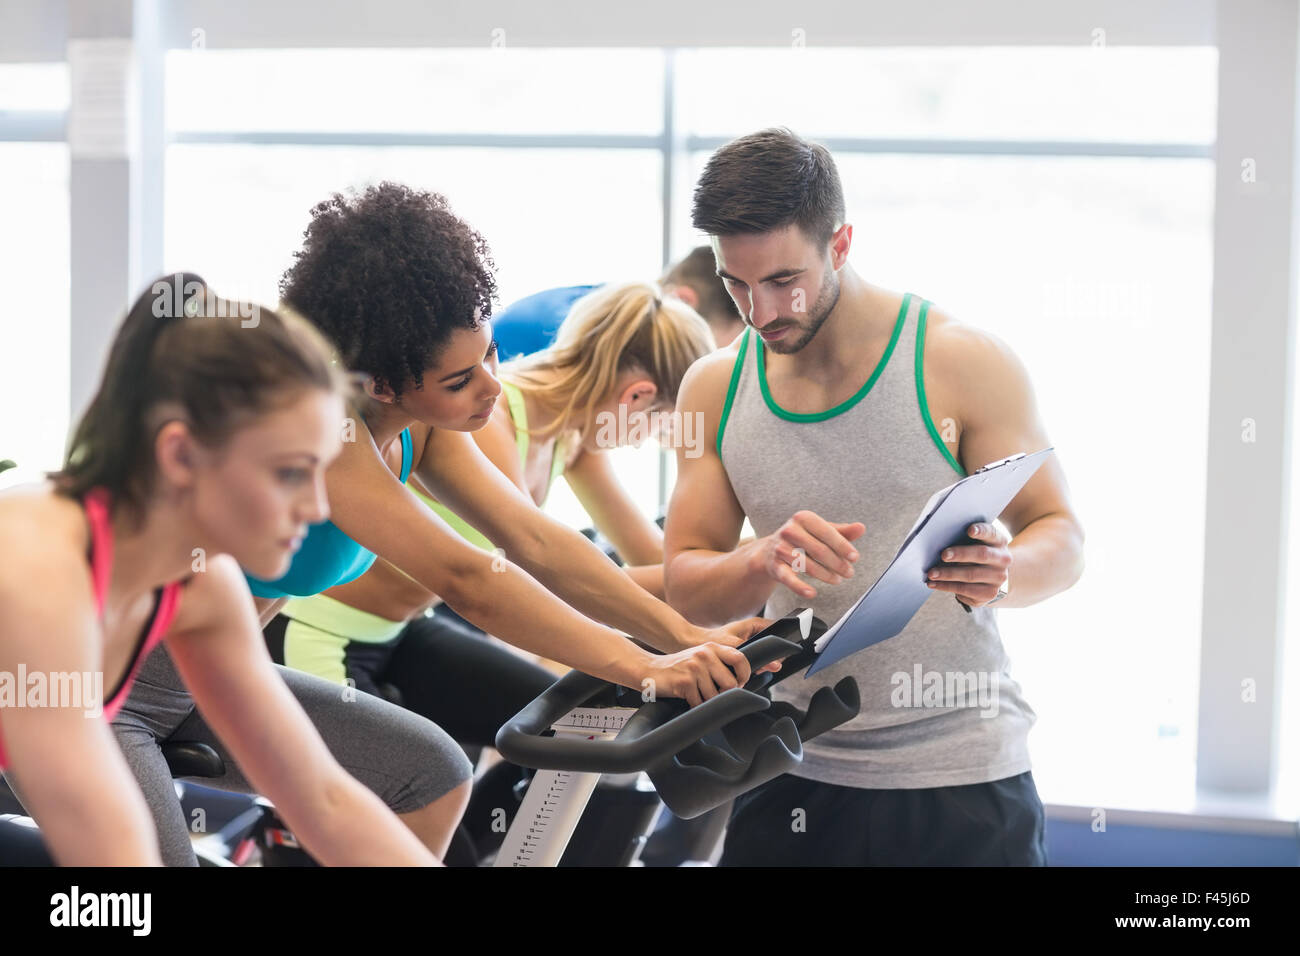 Fit people in a spin class Stock Photo